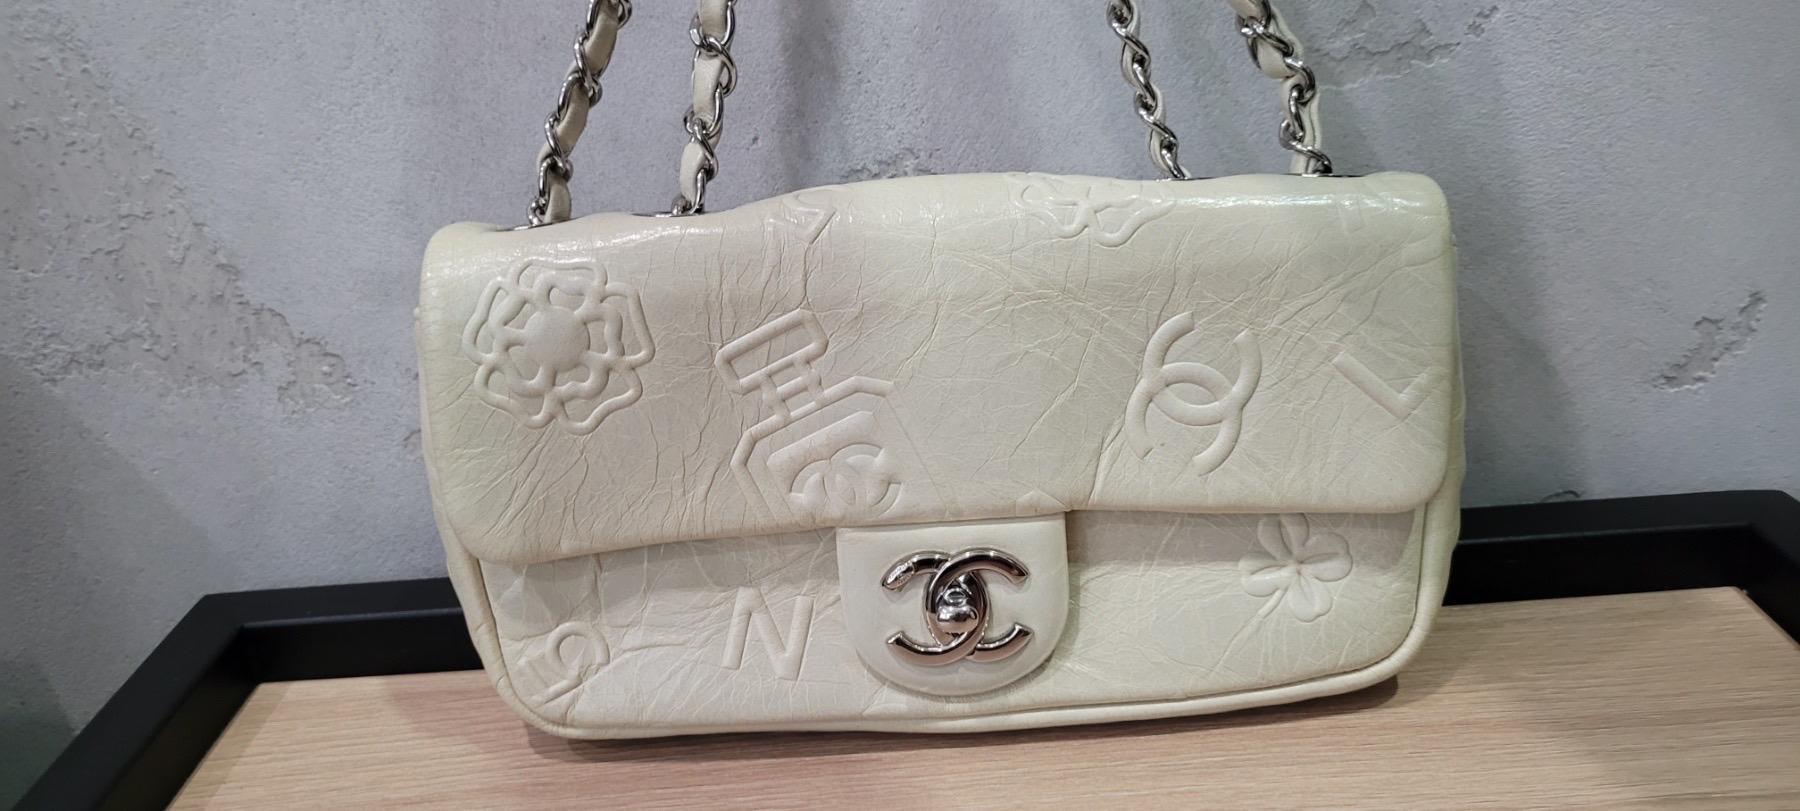 Chanel White Embossed Leather Precious Symbols Small Flap Bag

This Chanel White Leather Symbols Small Flap Bag is perfect if you are seeking something chic and luxurious to hold all of your girl essentials. It features gorgeous leather with